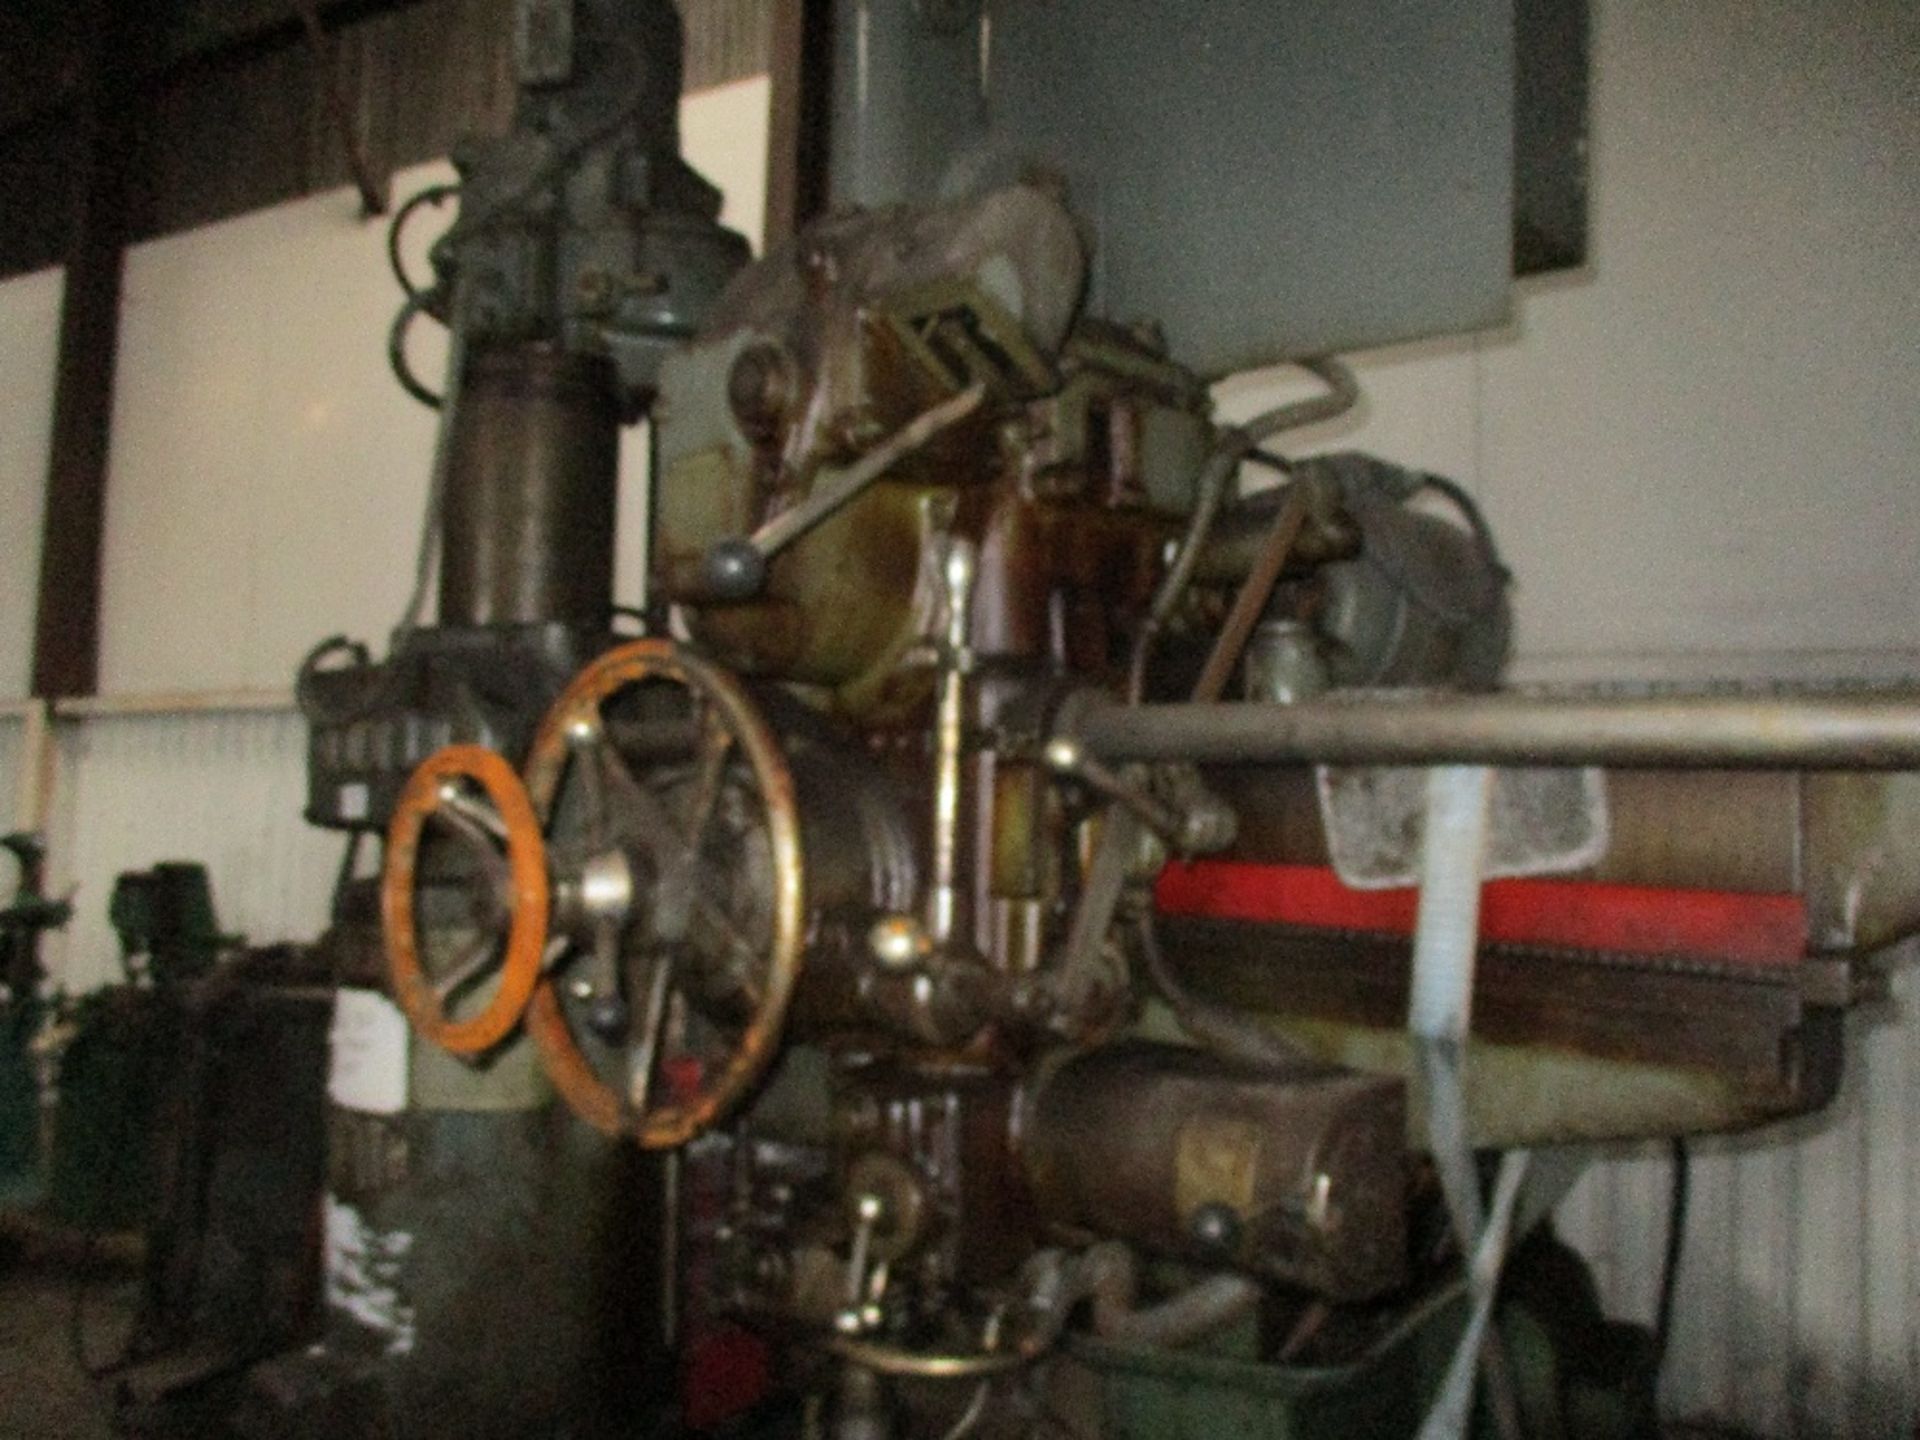 ASQUITH RADIAL DRILL DIRECT FROM FACTORY CLOSURE MID MAY - Image 6 of 7